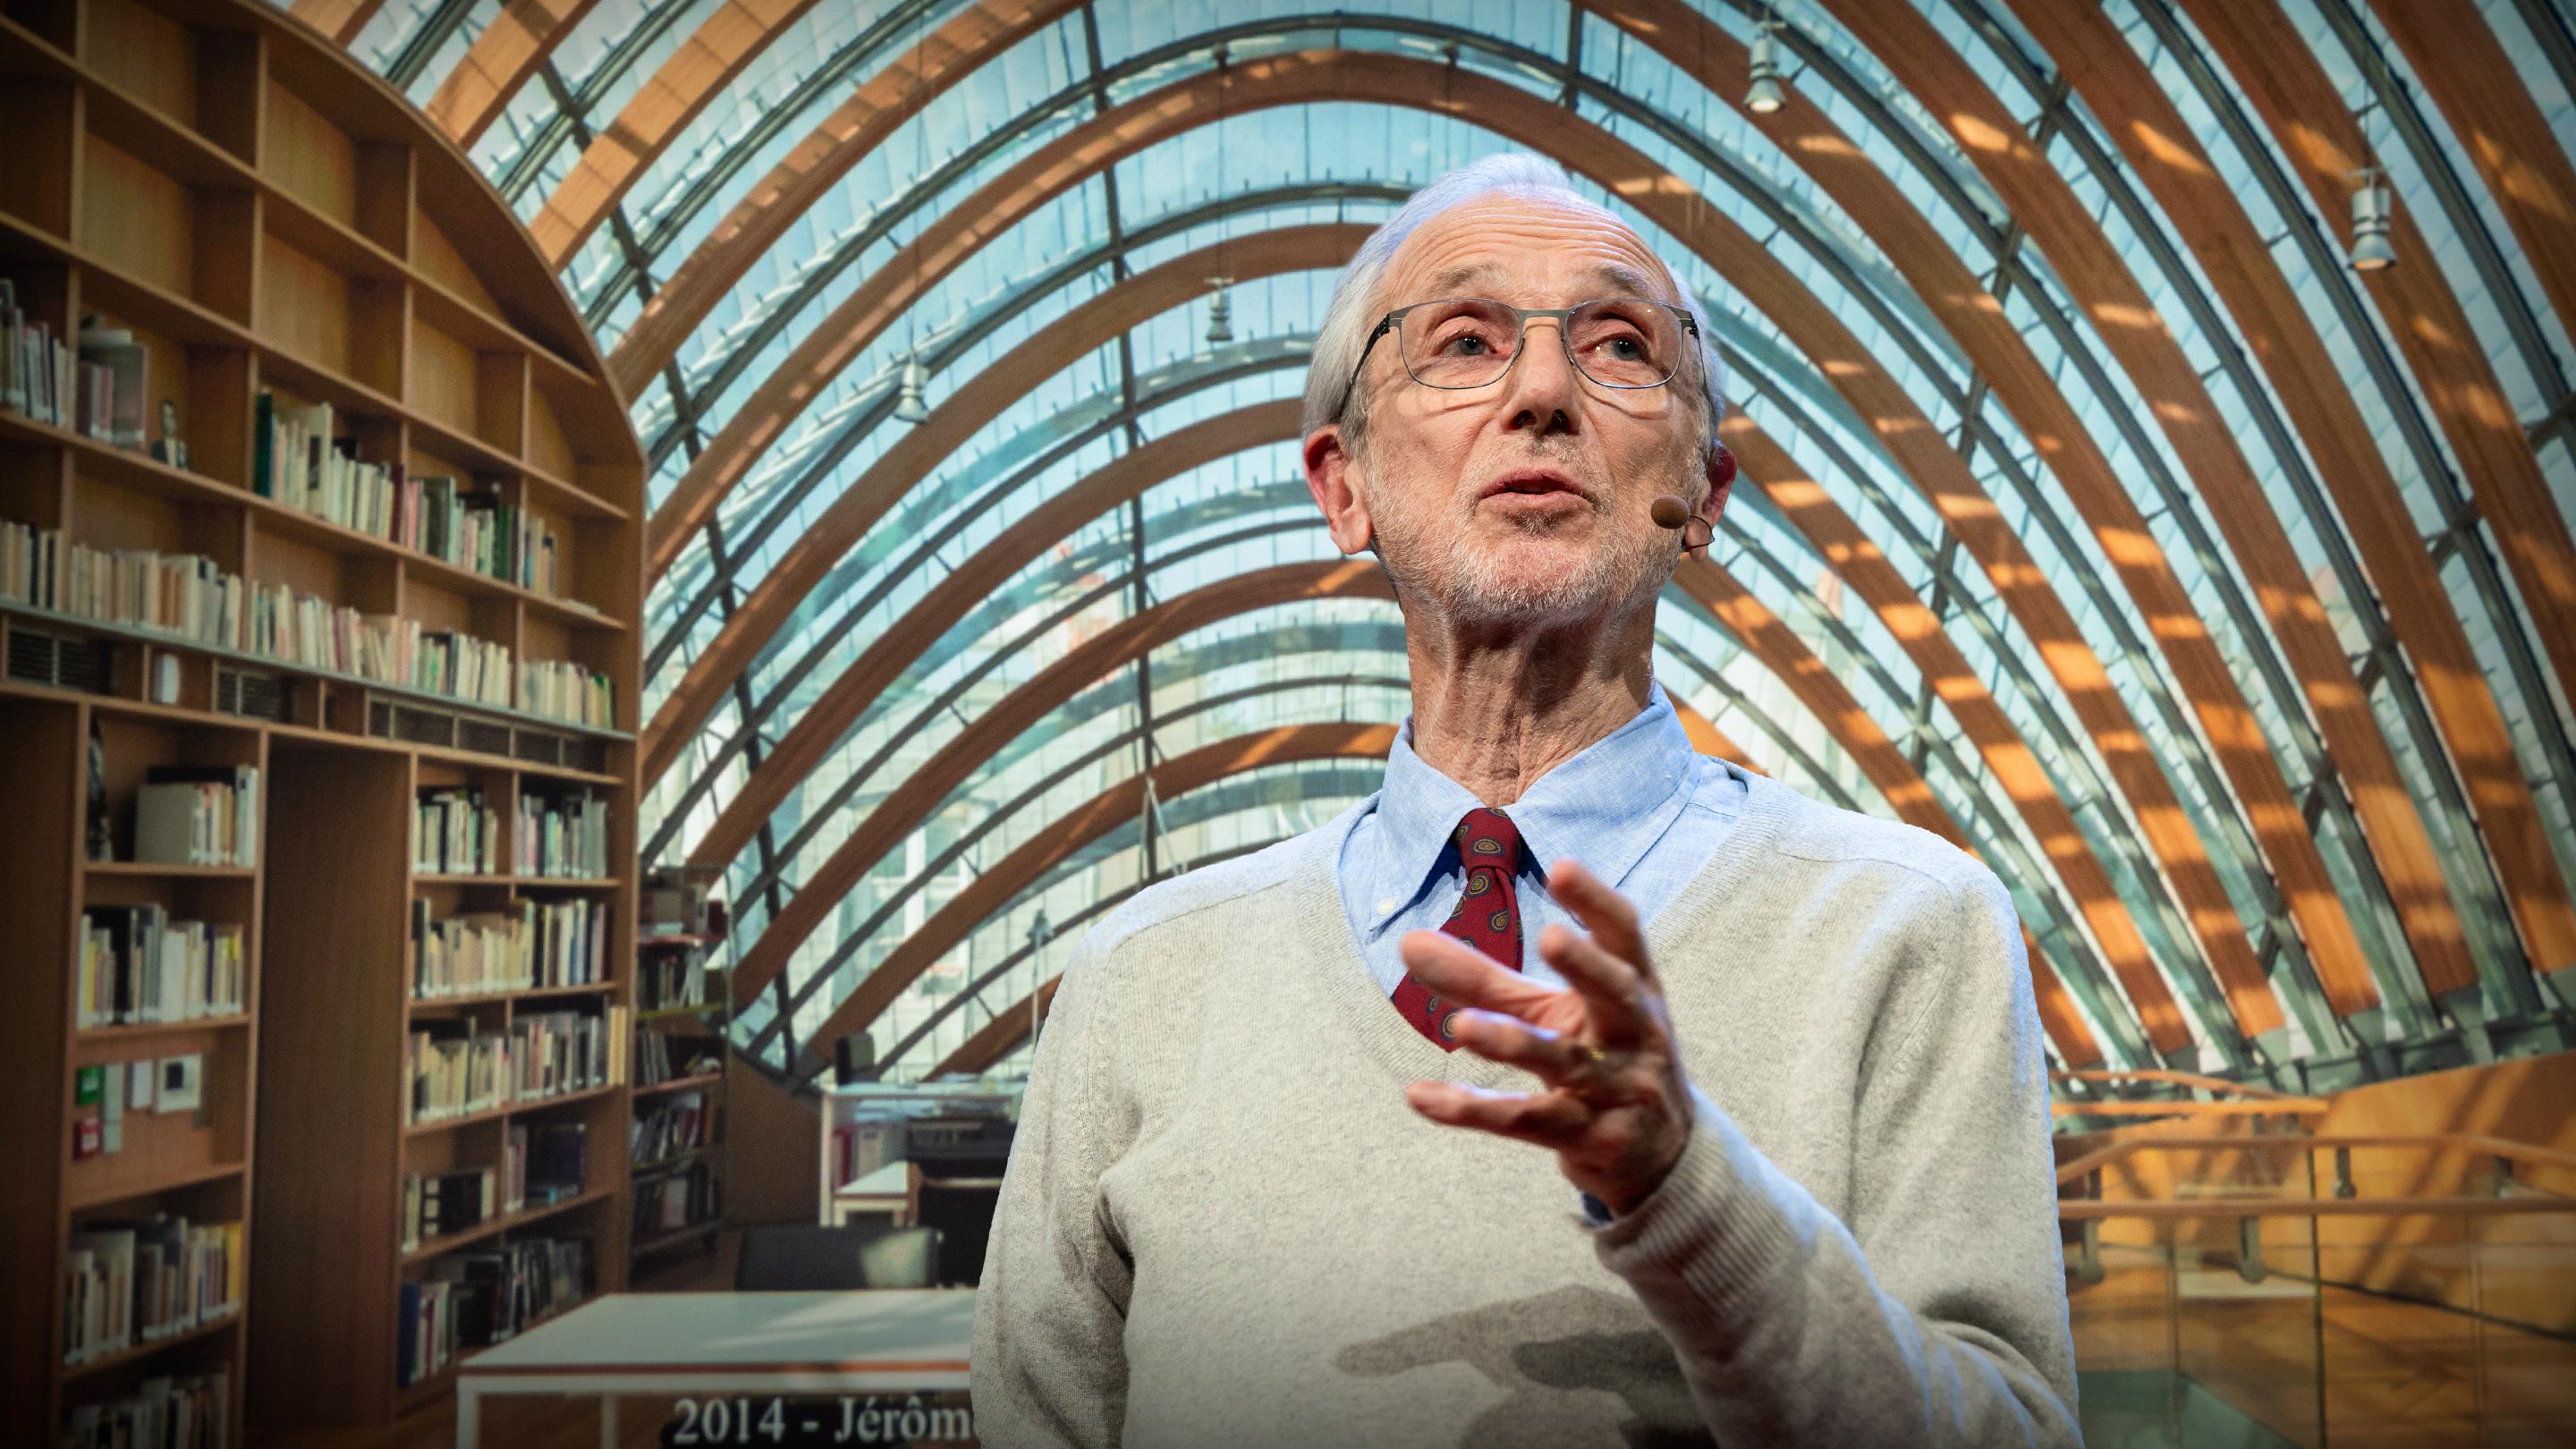 The genius behind some of the world’s most famous buildings | Renzo Piano